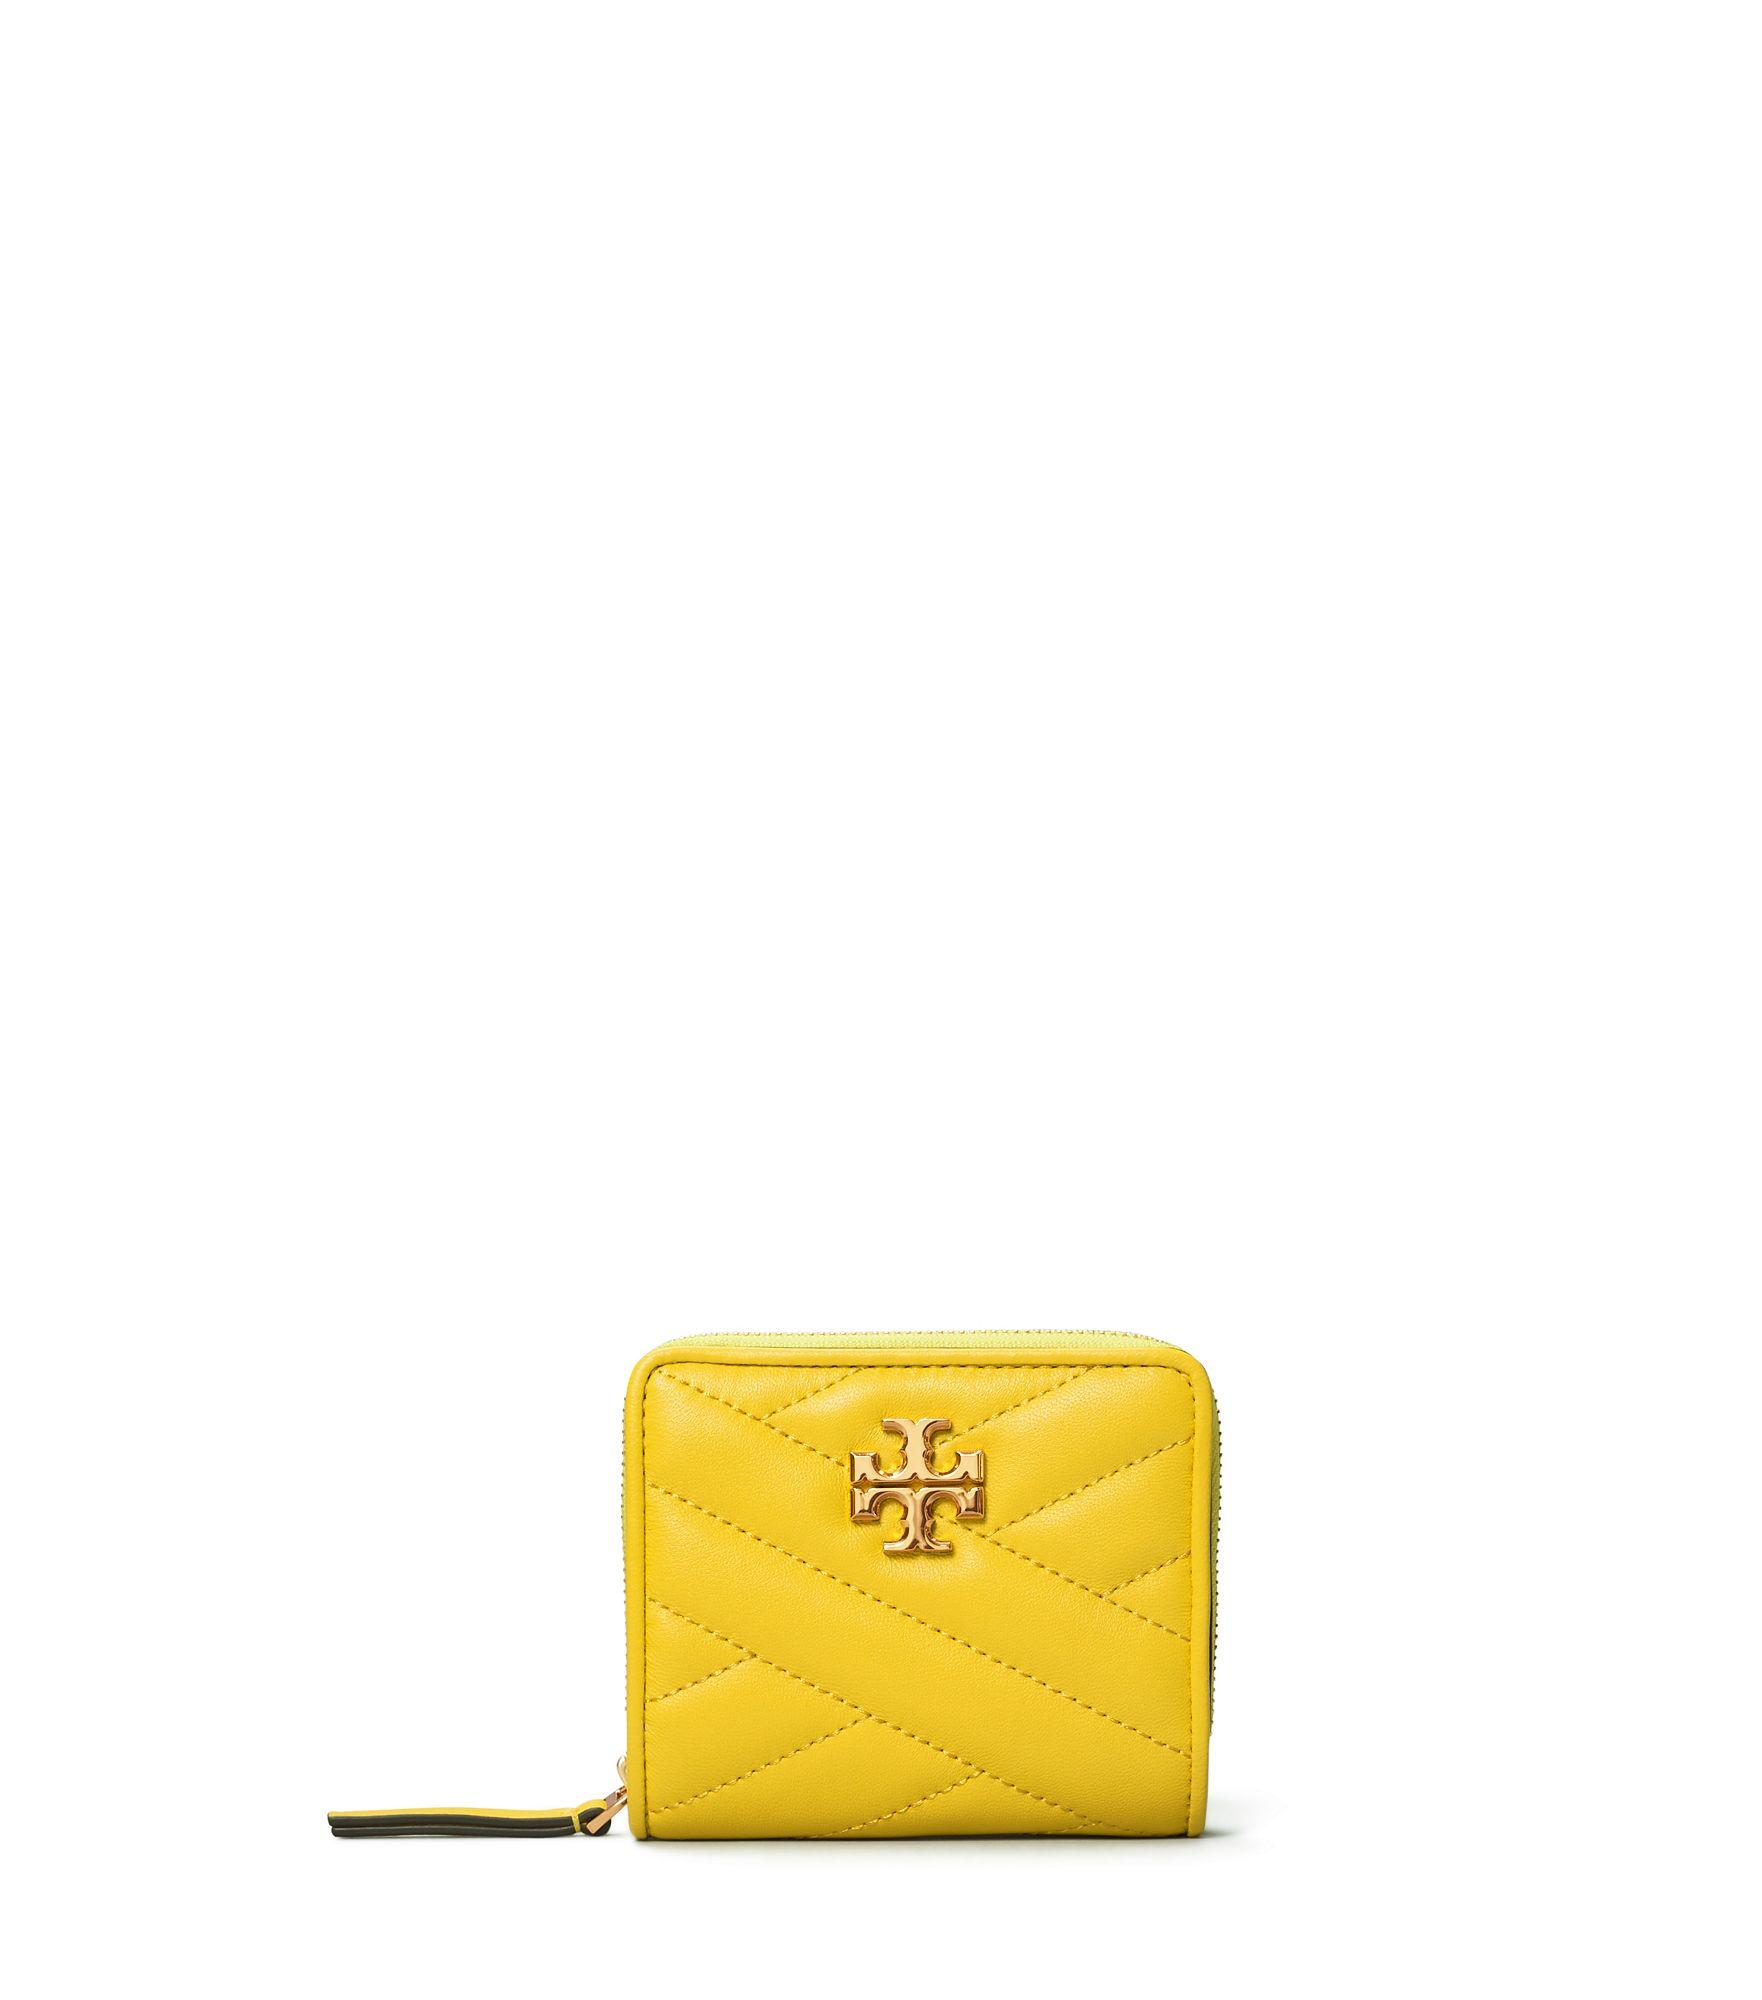 Tory Burch Leather Kira Zipped Wallet in Yellow | Lyst